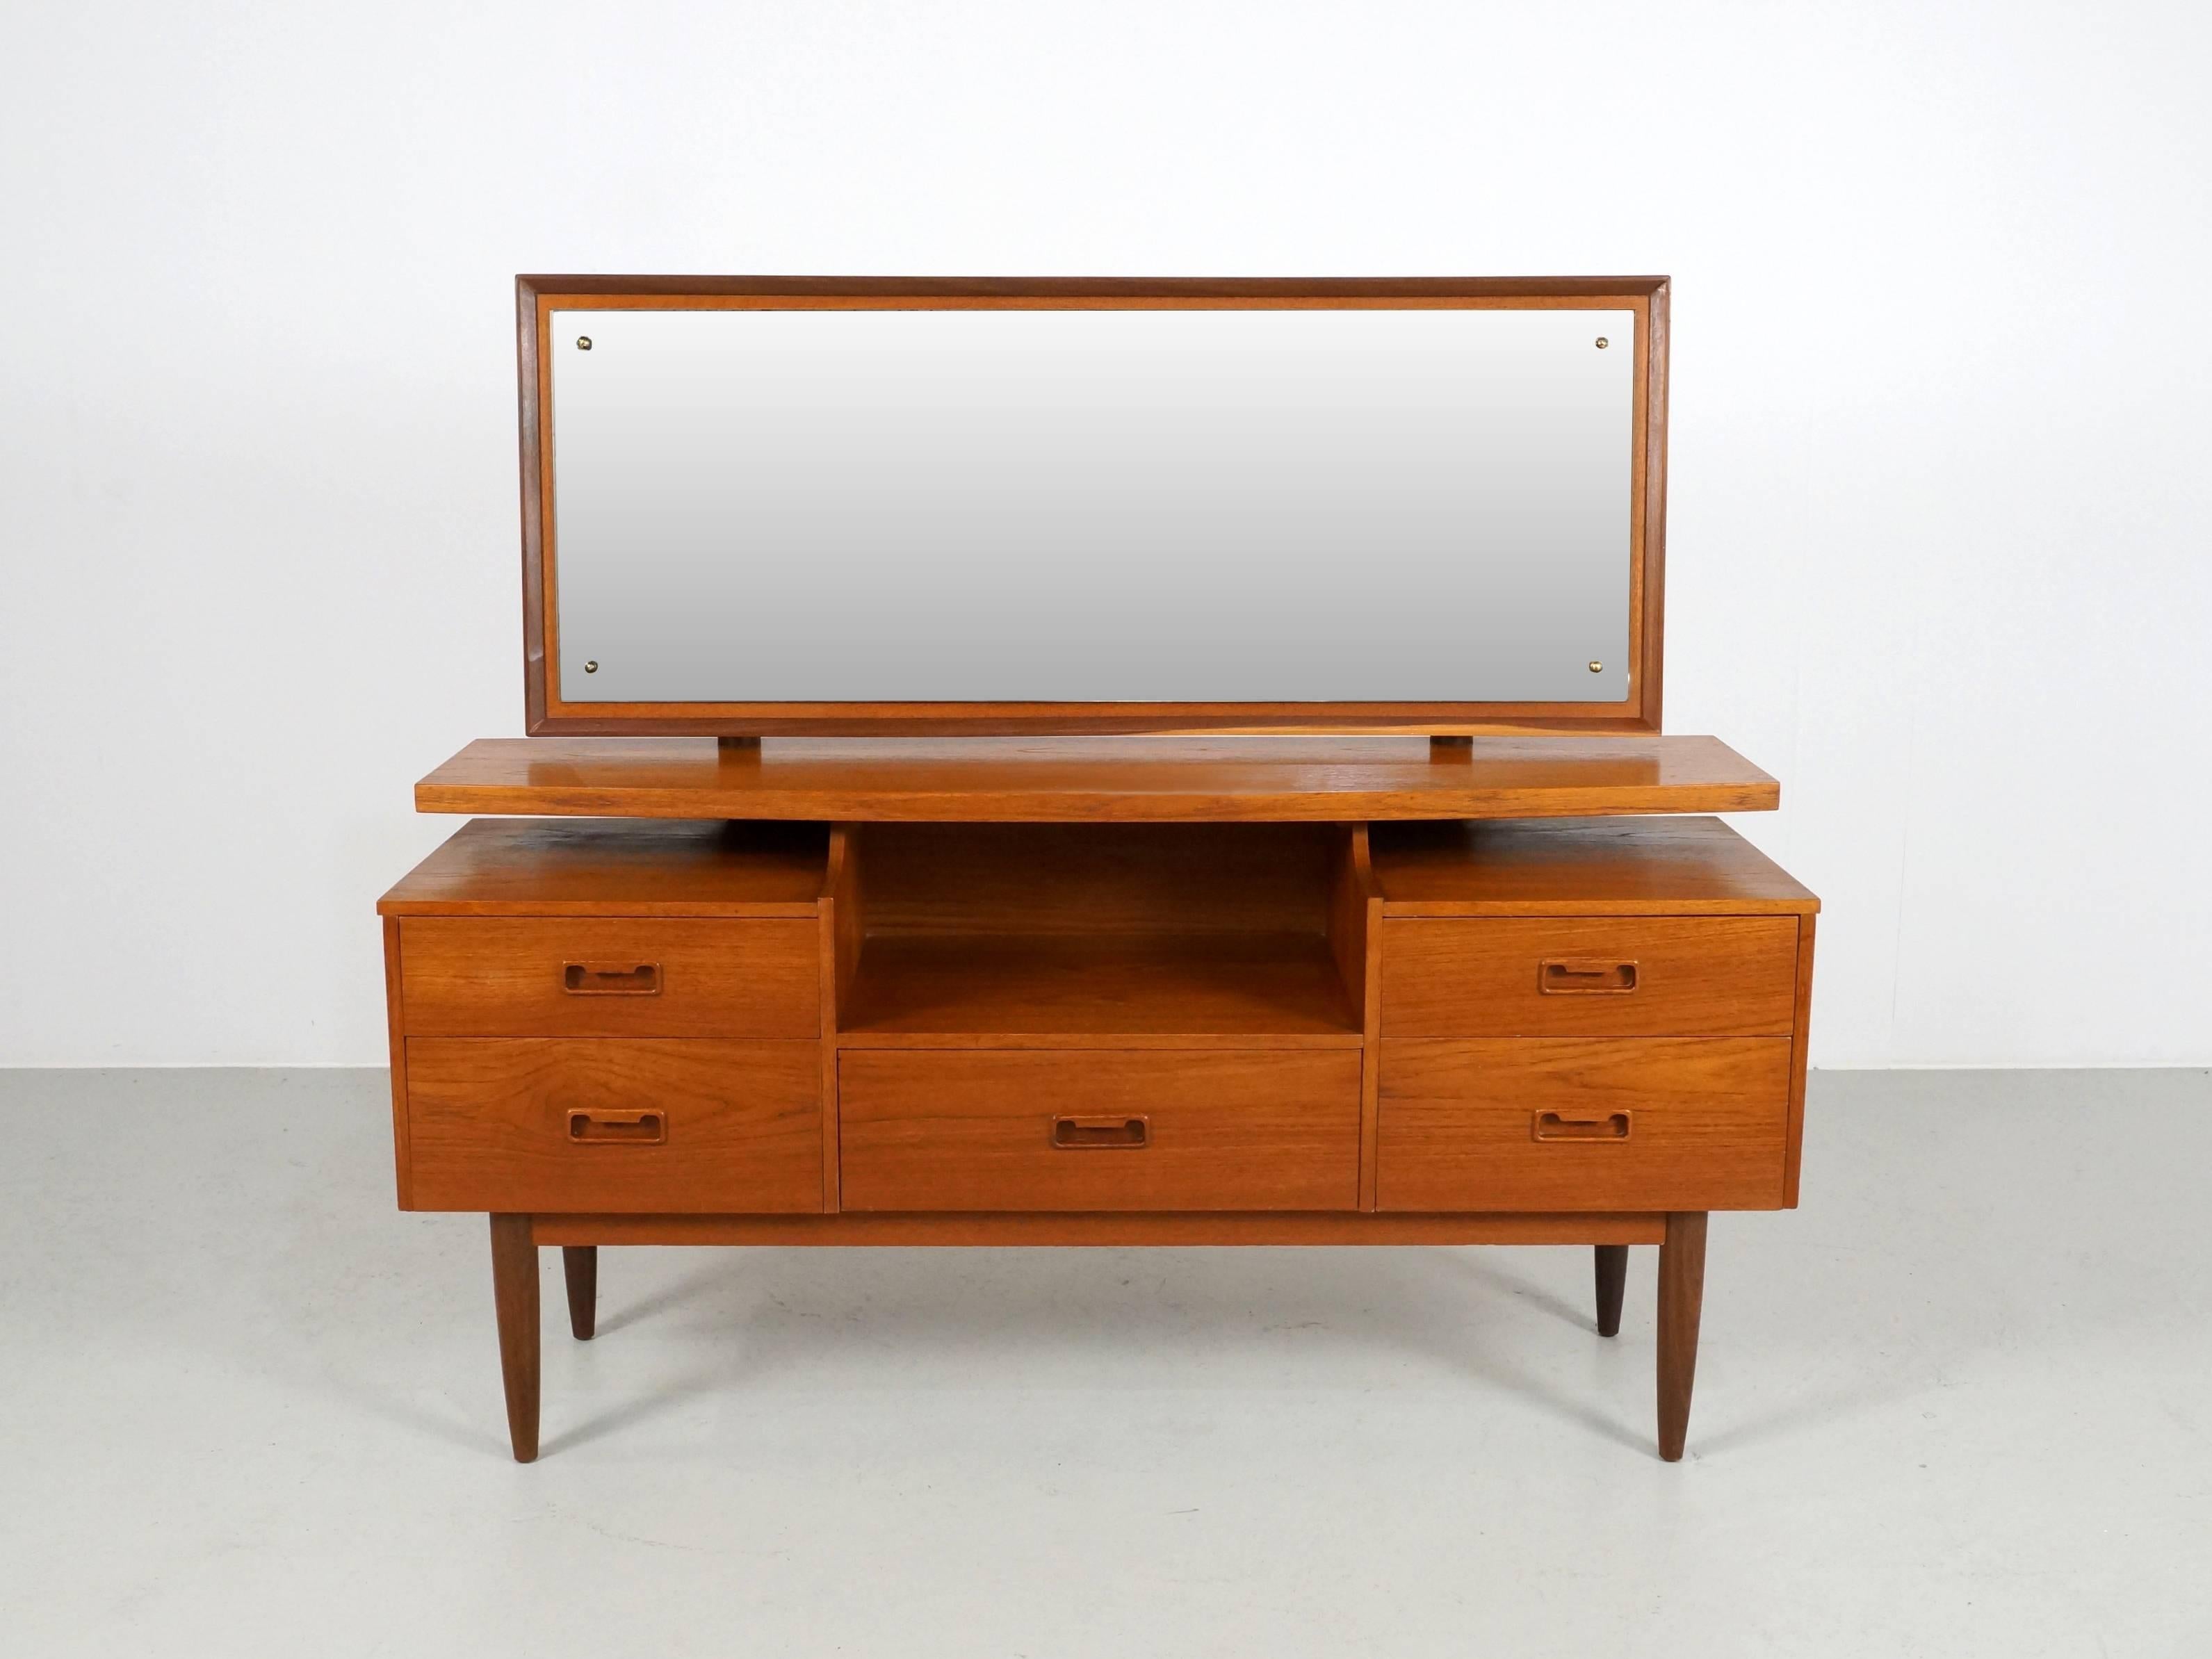 A really useful and attractive vanity or dressing table in teakwood, nicely designed with a wide mirror which stands slightly above the cabinet base part. Attractive Danish modern design with tapered legs and carved inset pulls and a generous amount